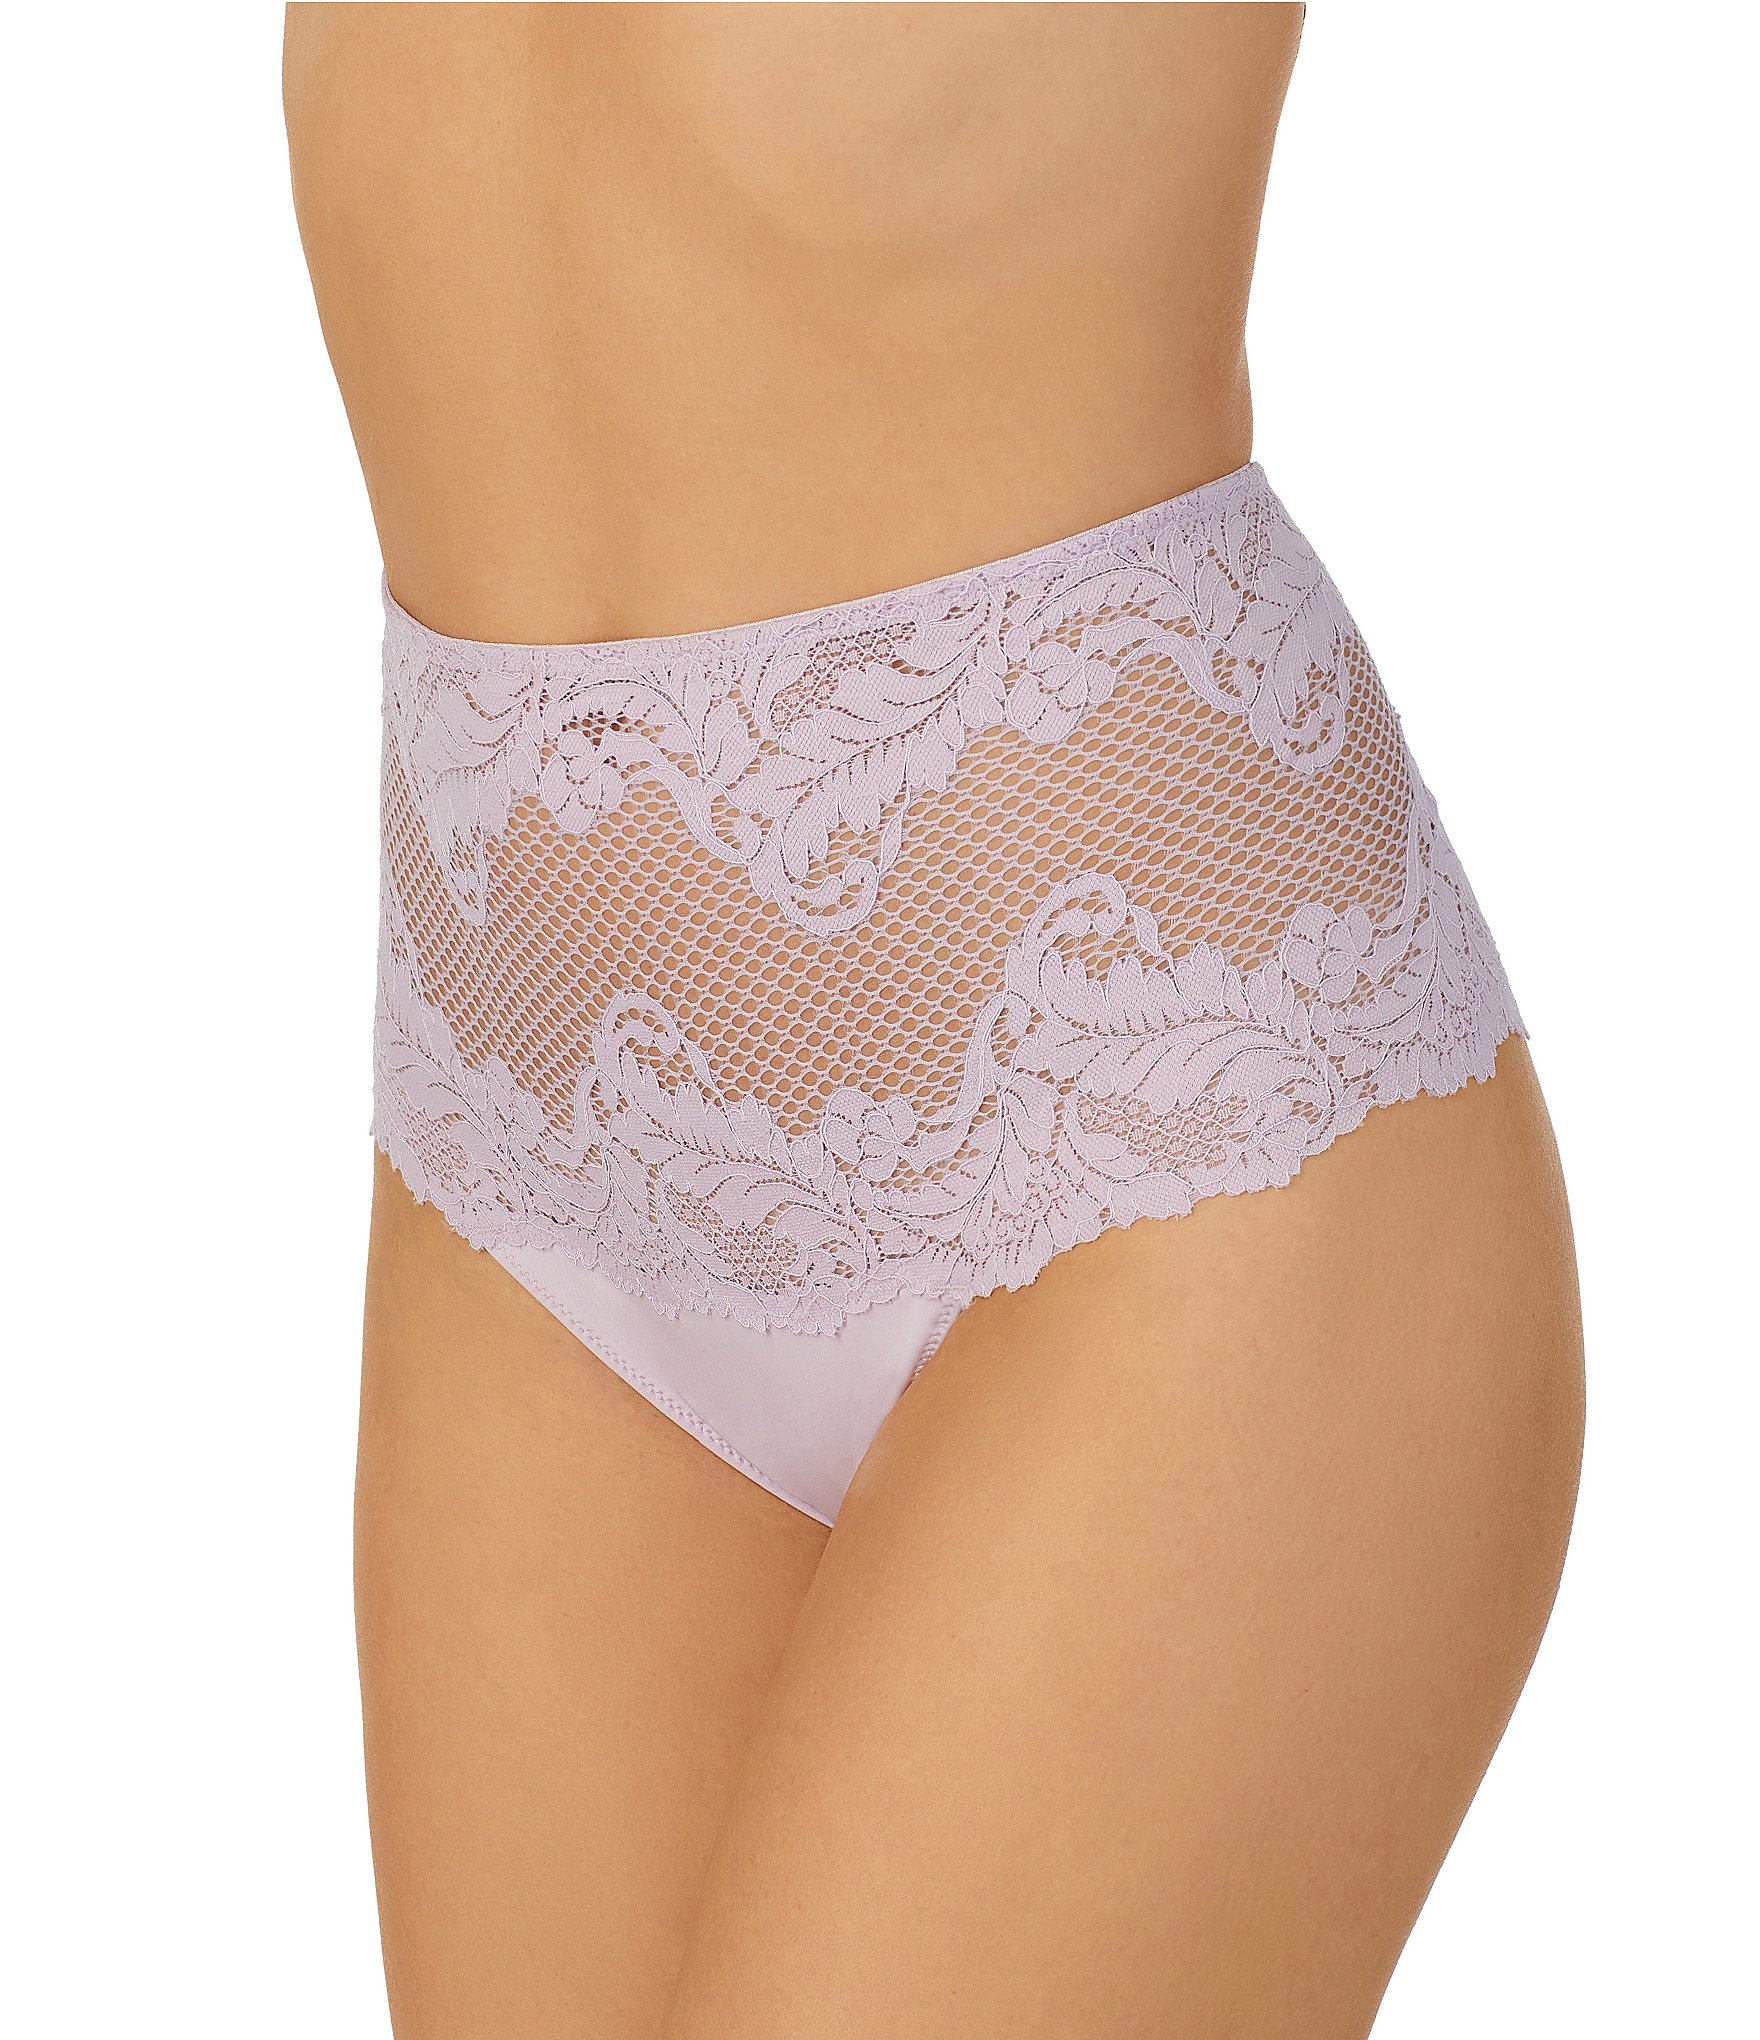 Le Mystere Lace Allure High Waisted Thong